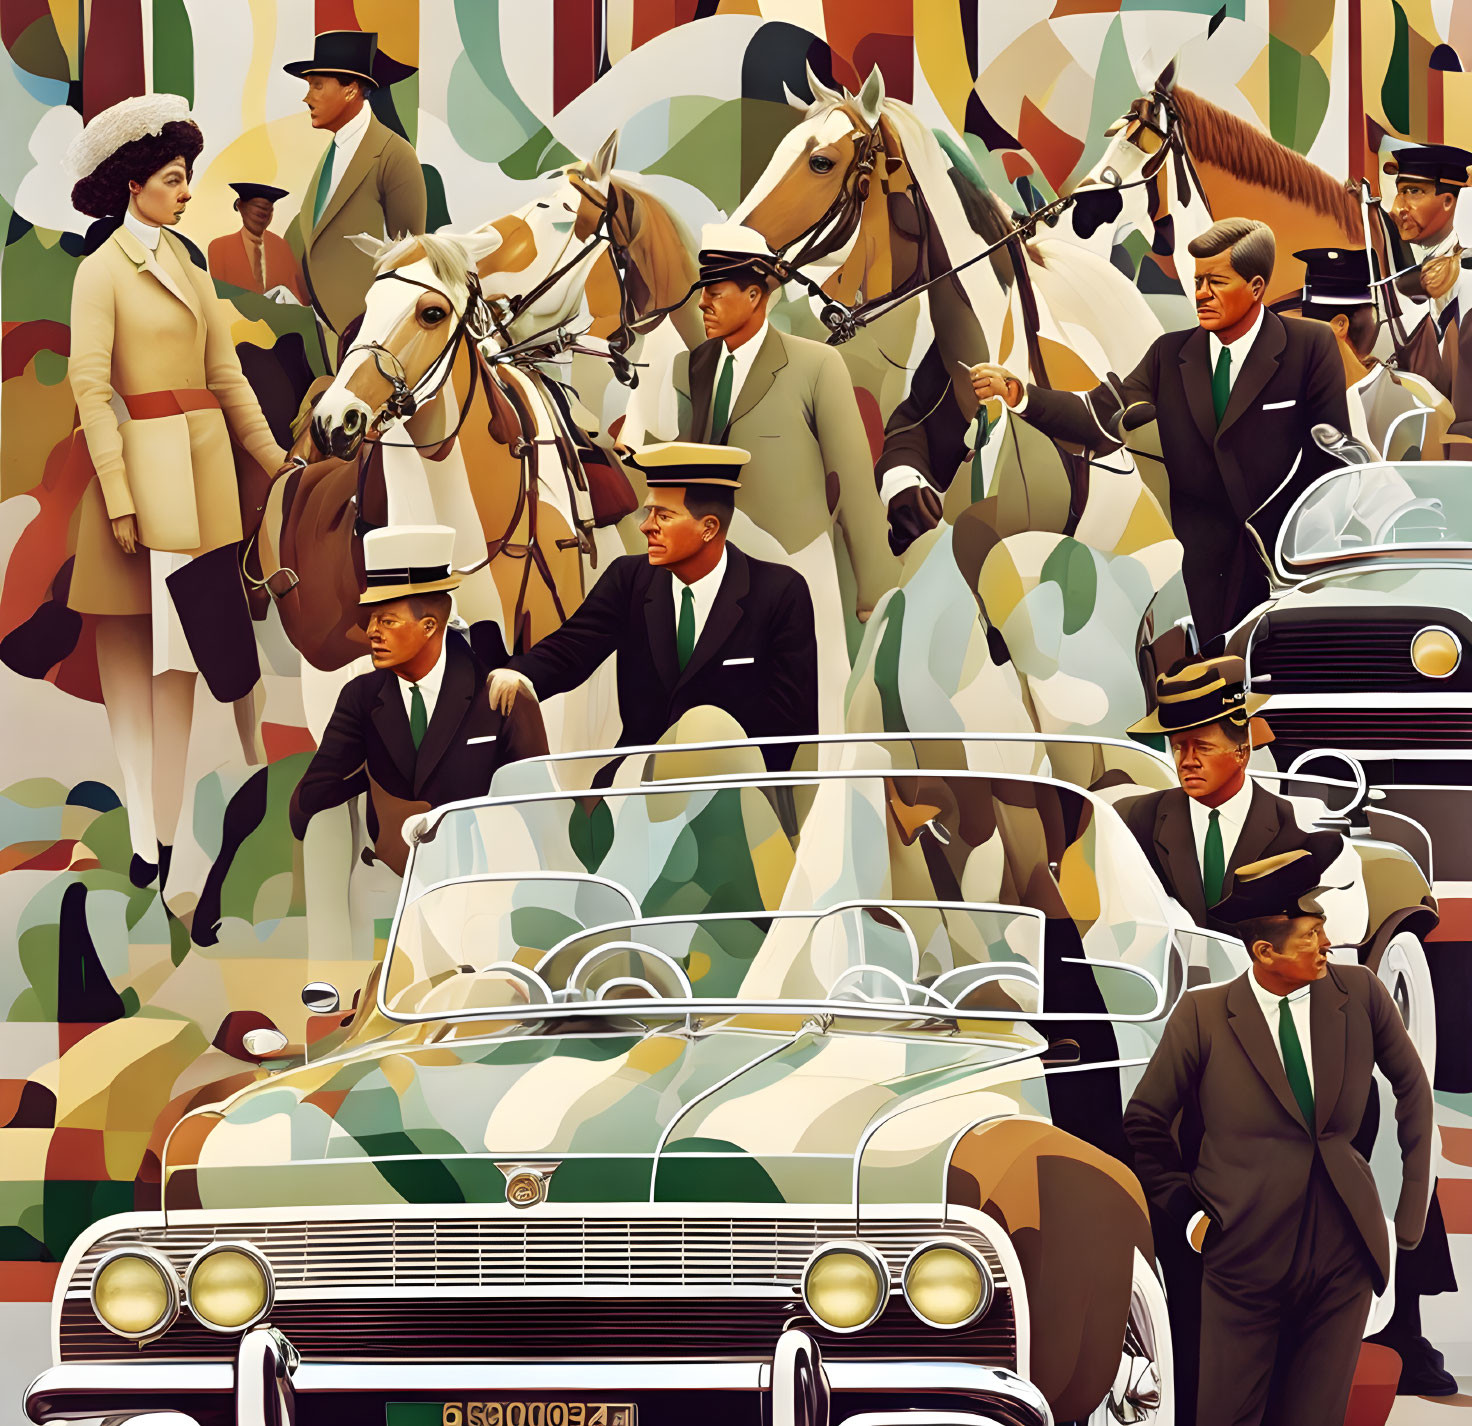 Stylized illustration of elegant individuals, horses, and vintage cars in a sophisticated, vintage-inspired scene